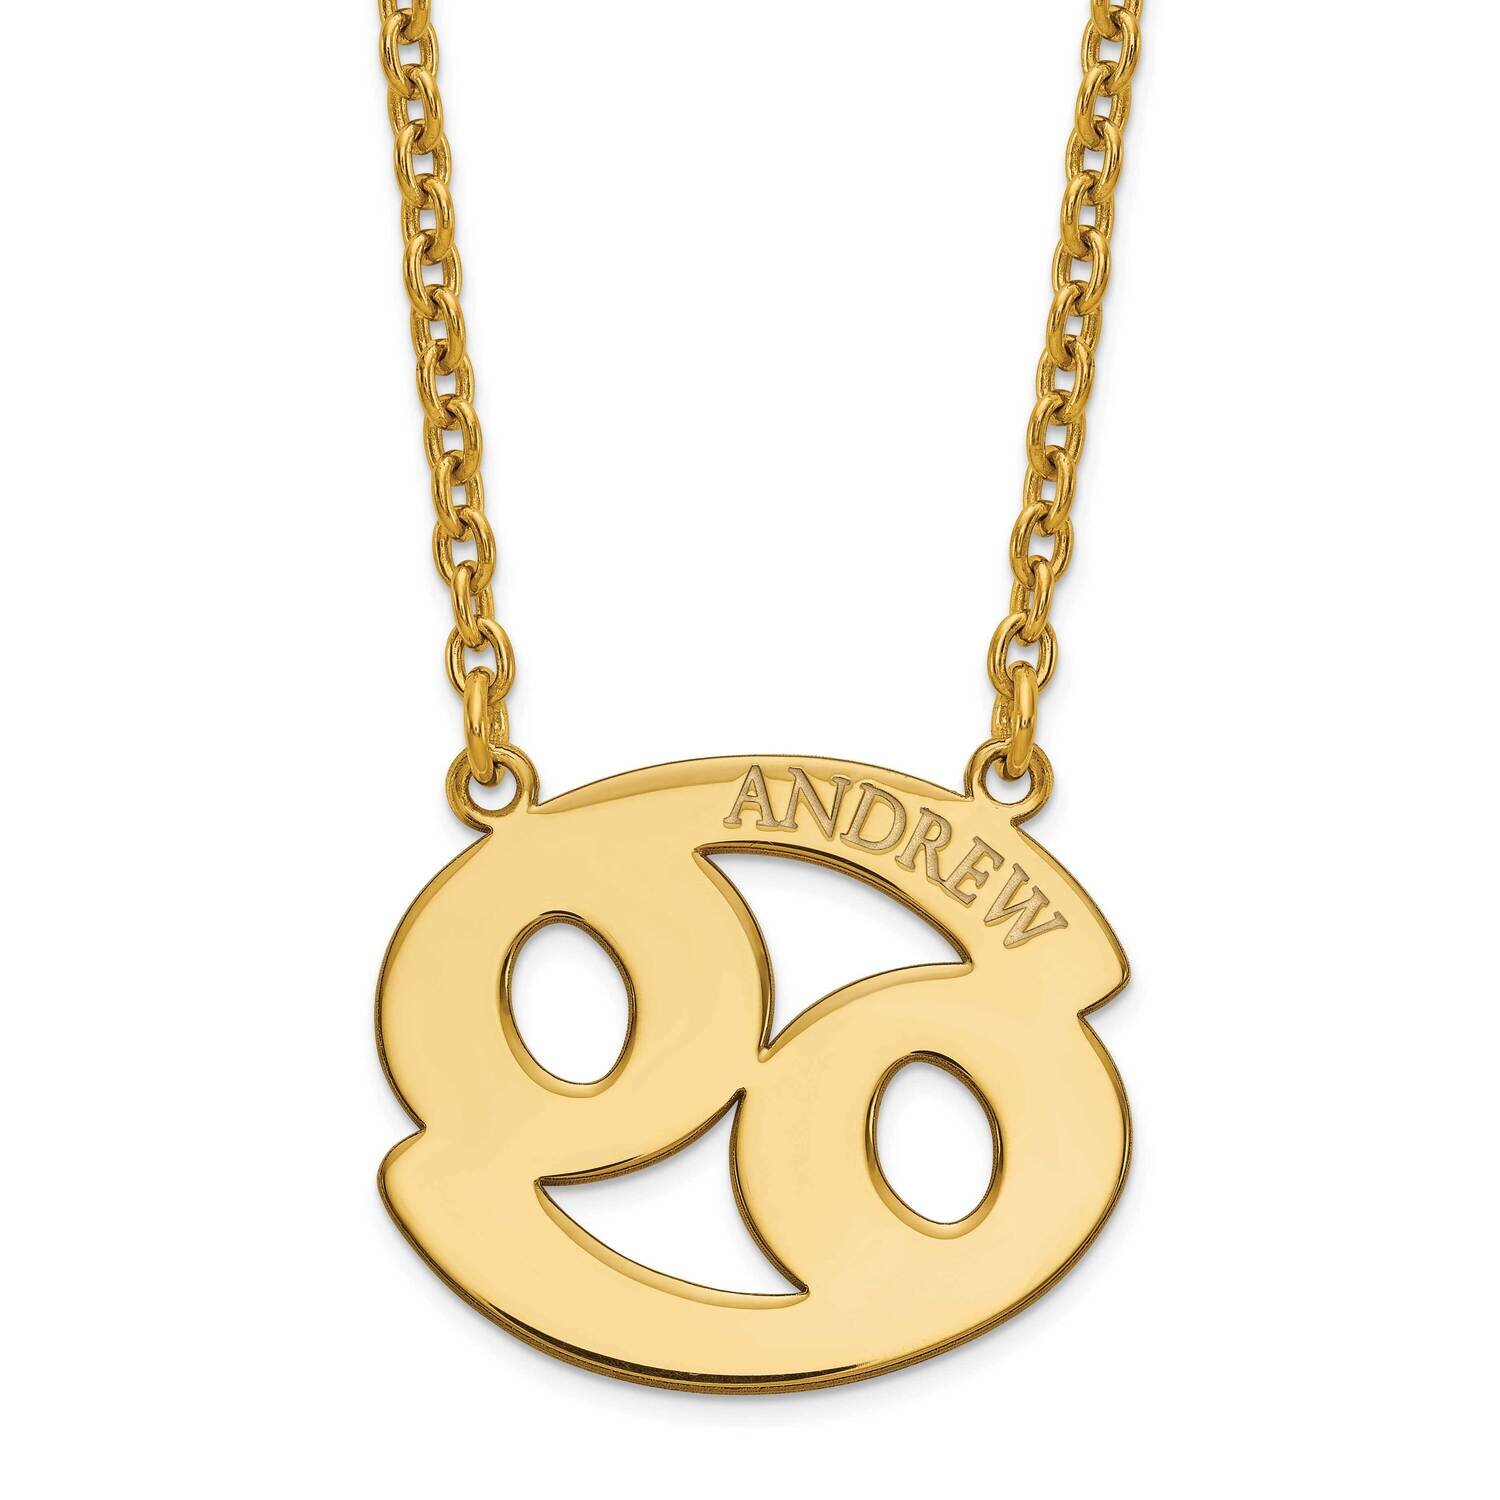 Cancer Zodiac Necklace Gold Plated Sterling Silver XNA746GP